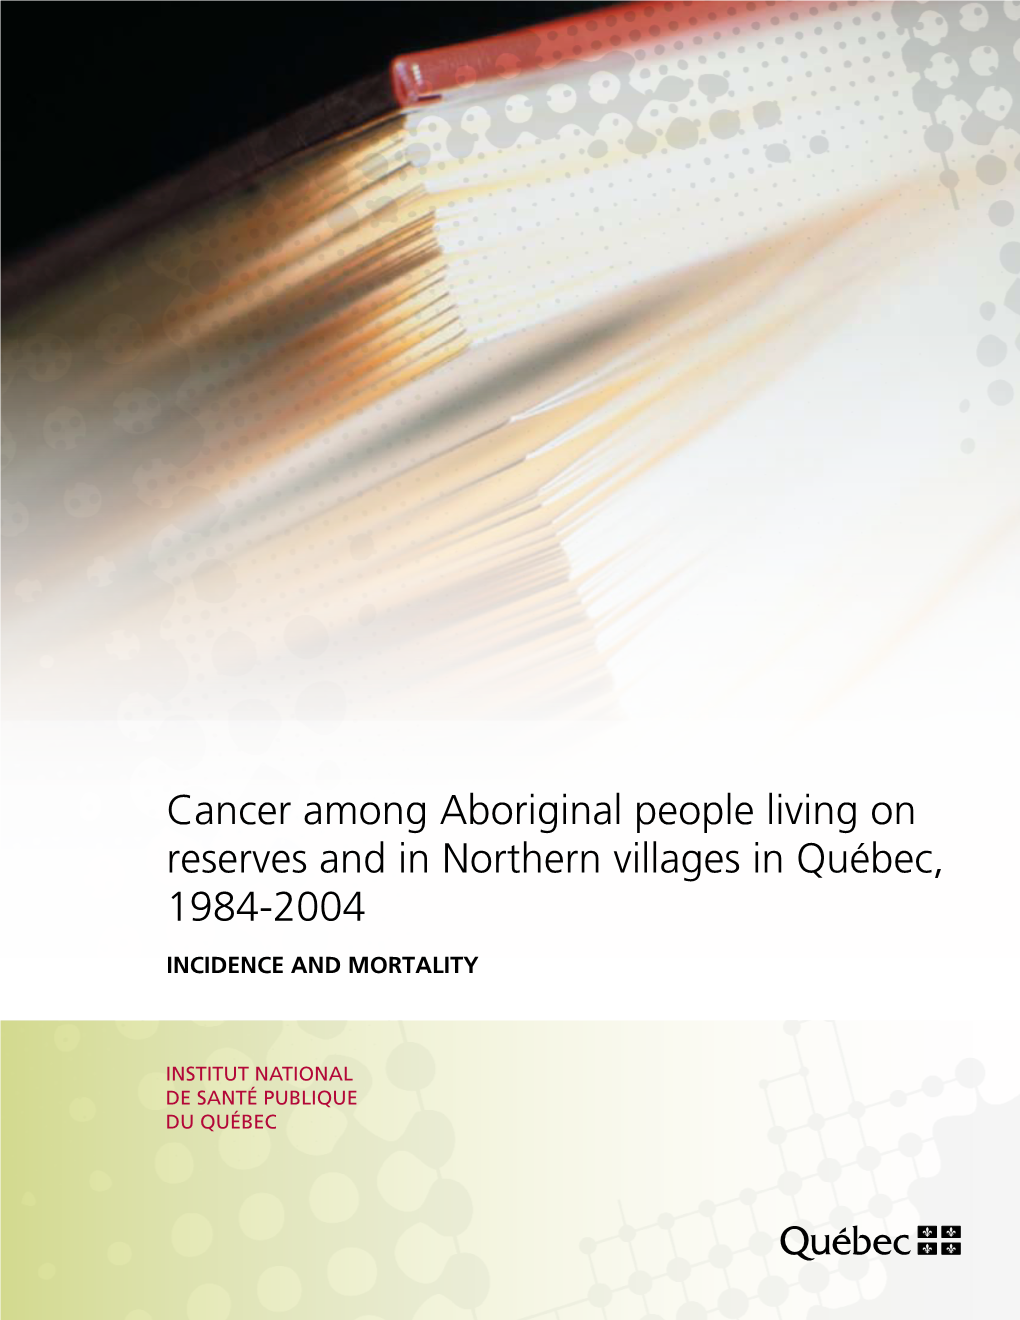 Cancer Among Aboriginal People Living on Reserves and in Northern Villages in Québec, 1984-2004